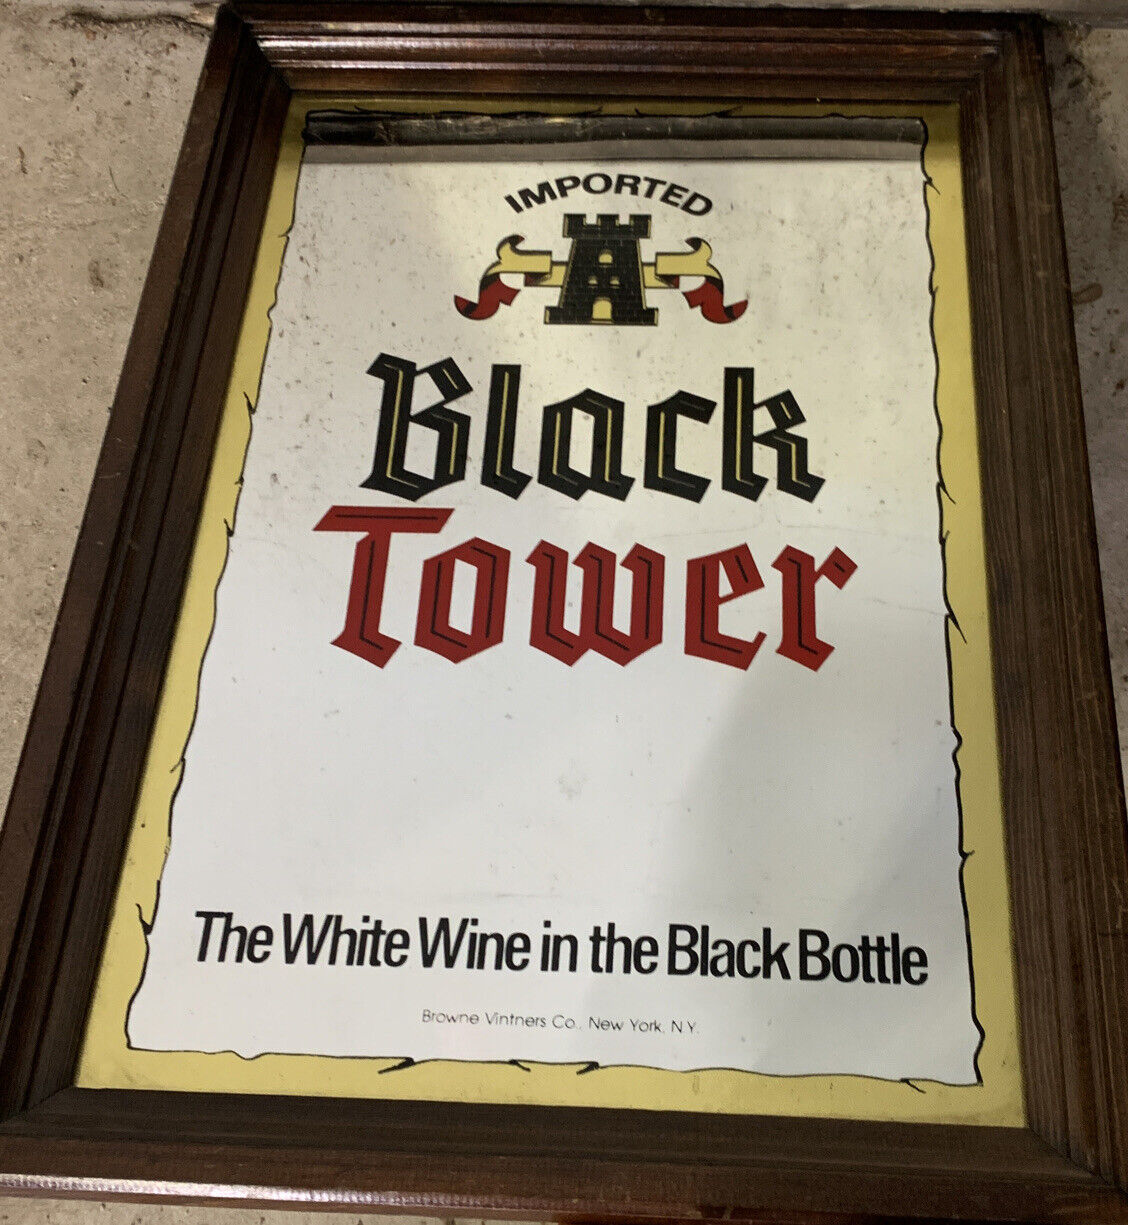 Vintage Imported Black Tower Mirror Sign Wood Framed White Wine In the Bottle